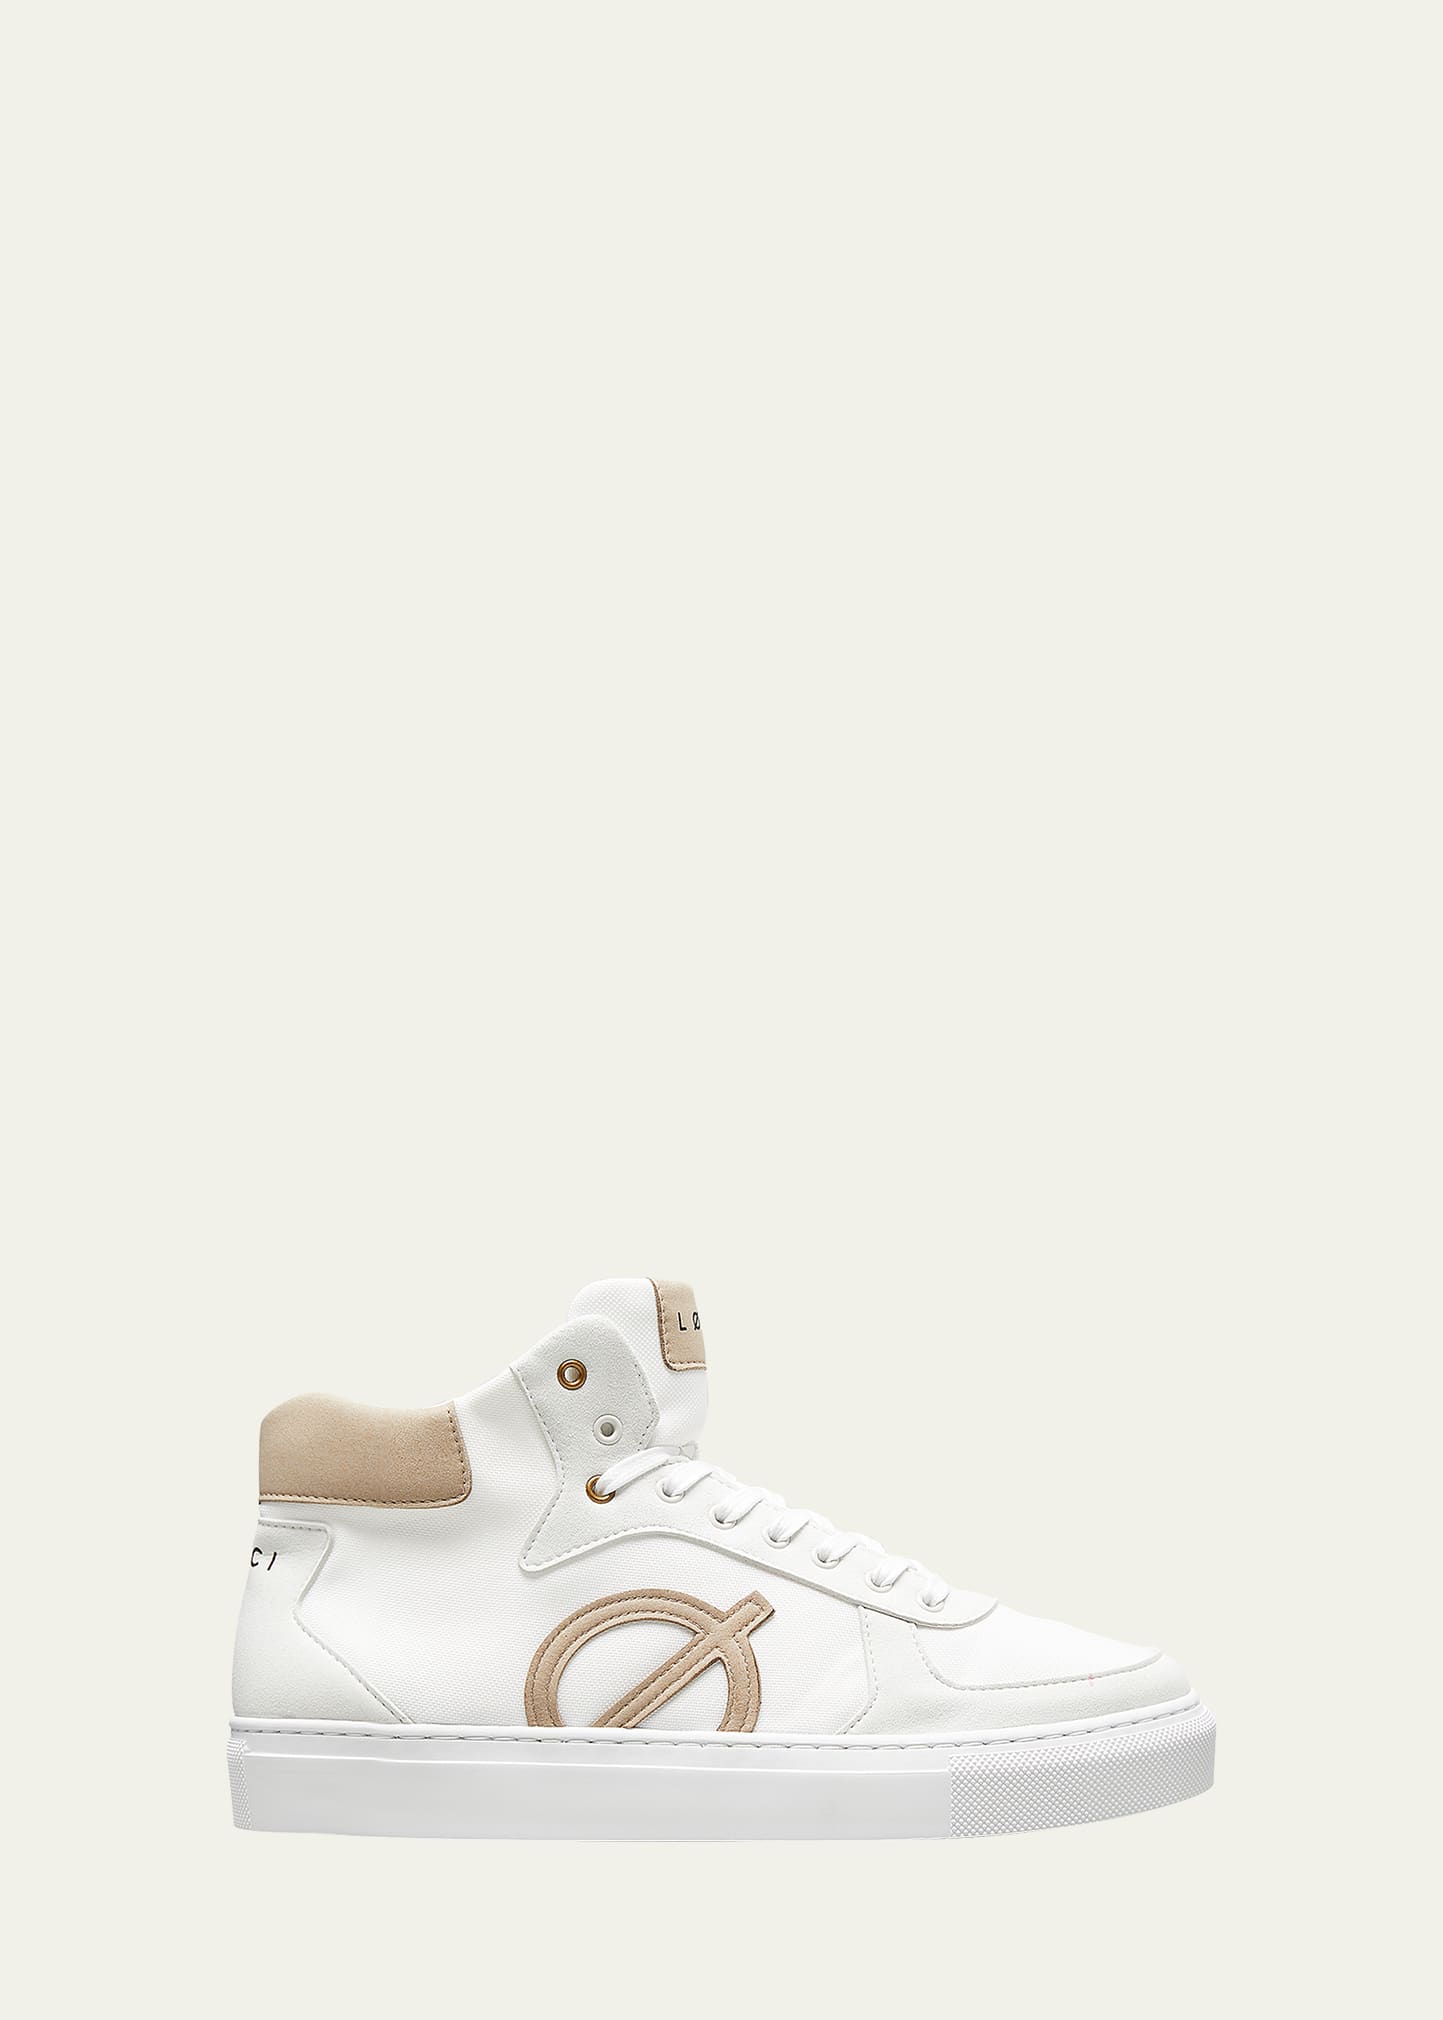 LOCI Eleven Colorblock High-Top Court Sneakers - Made with Recycled Nylon